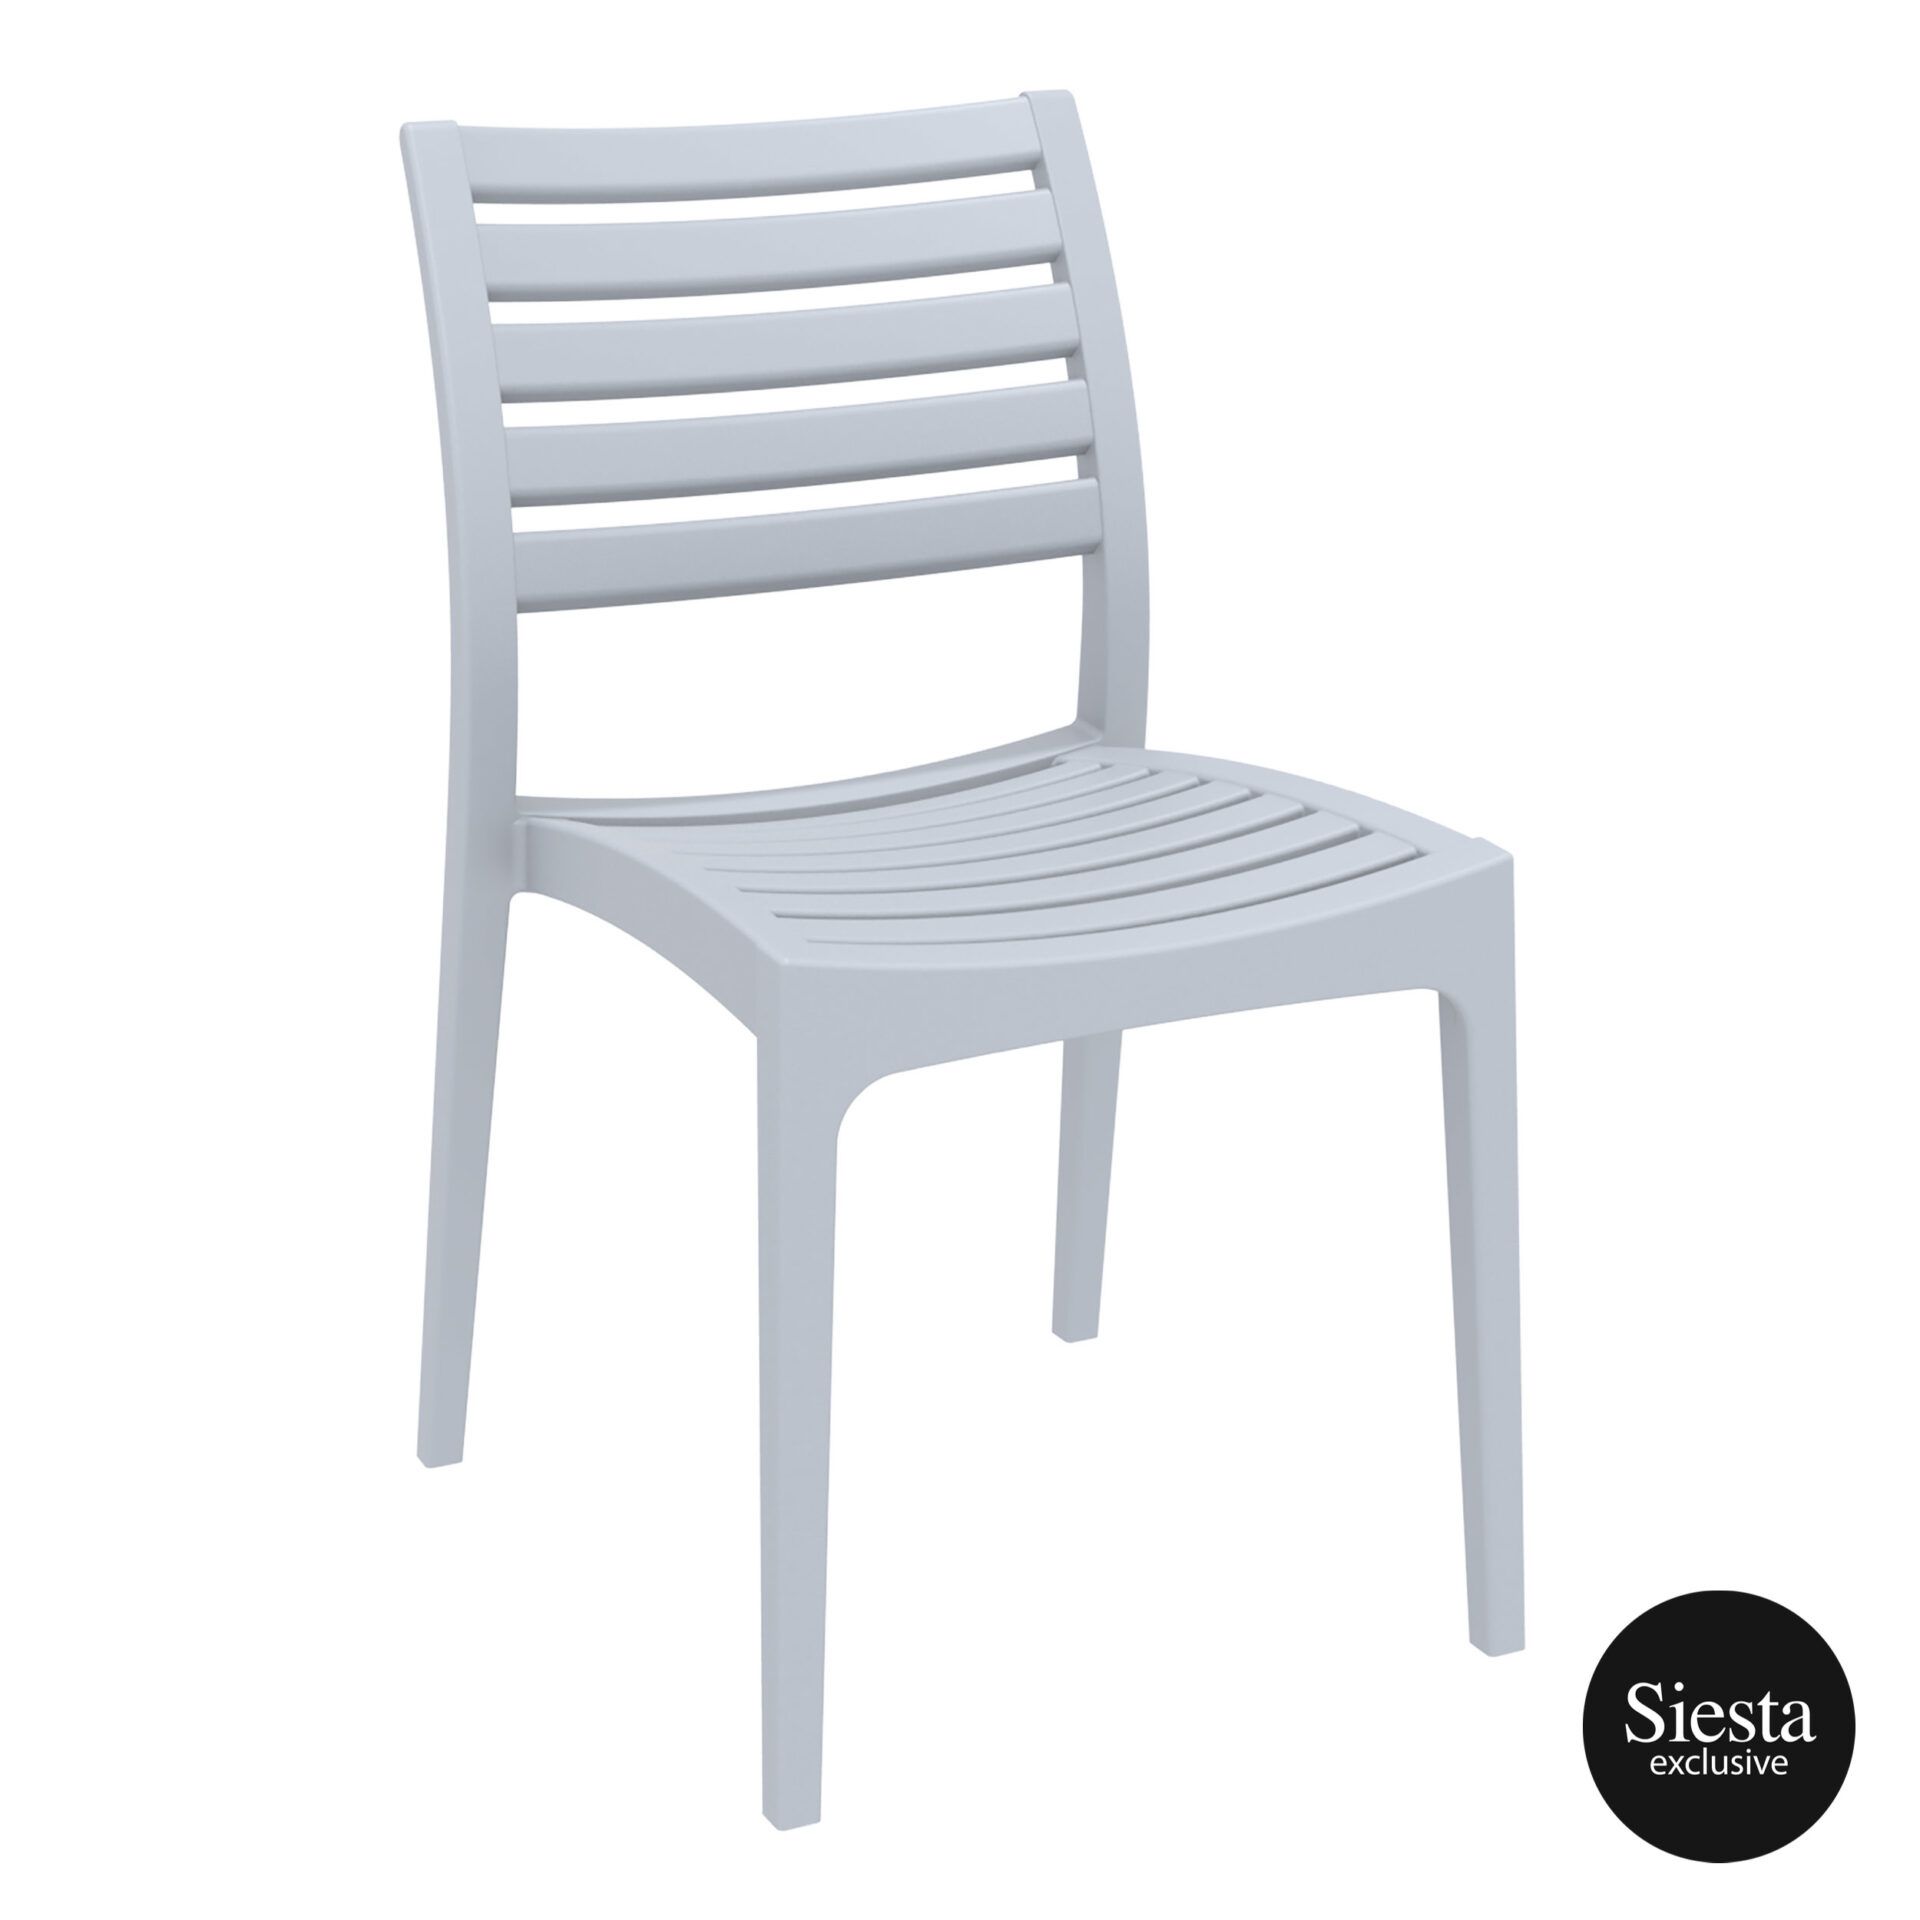 outdoor ares chair silvergrey front side